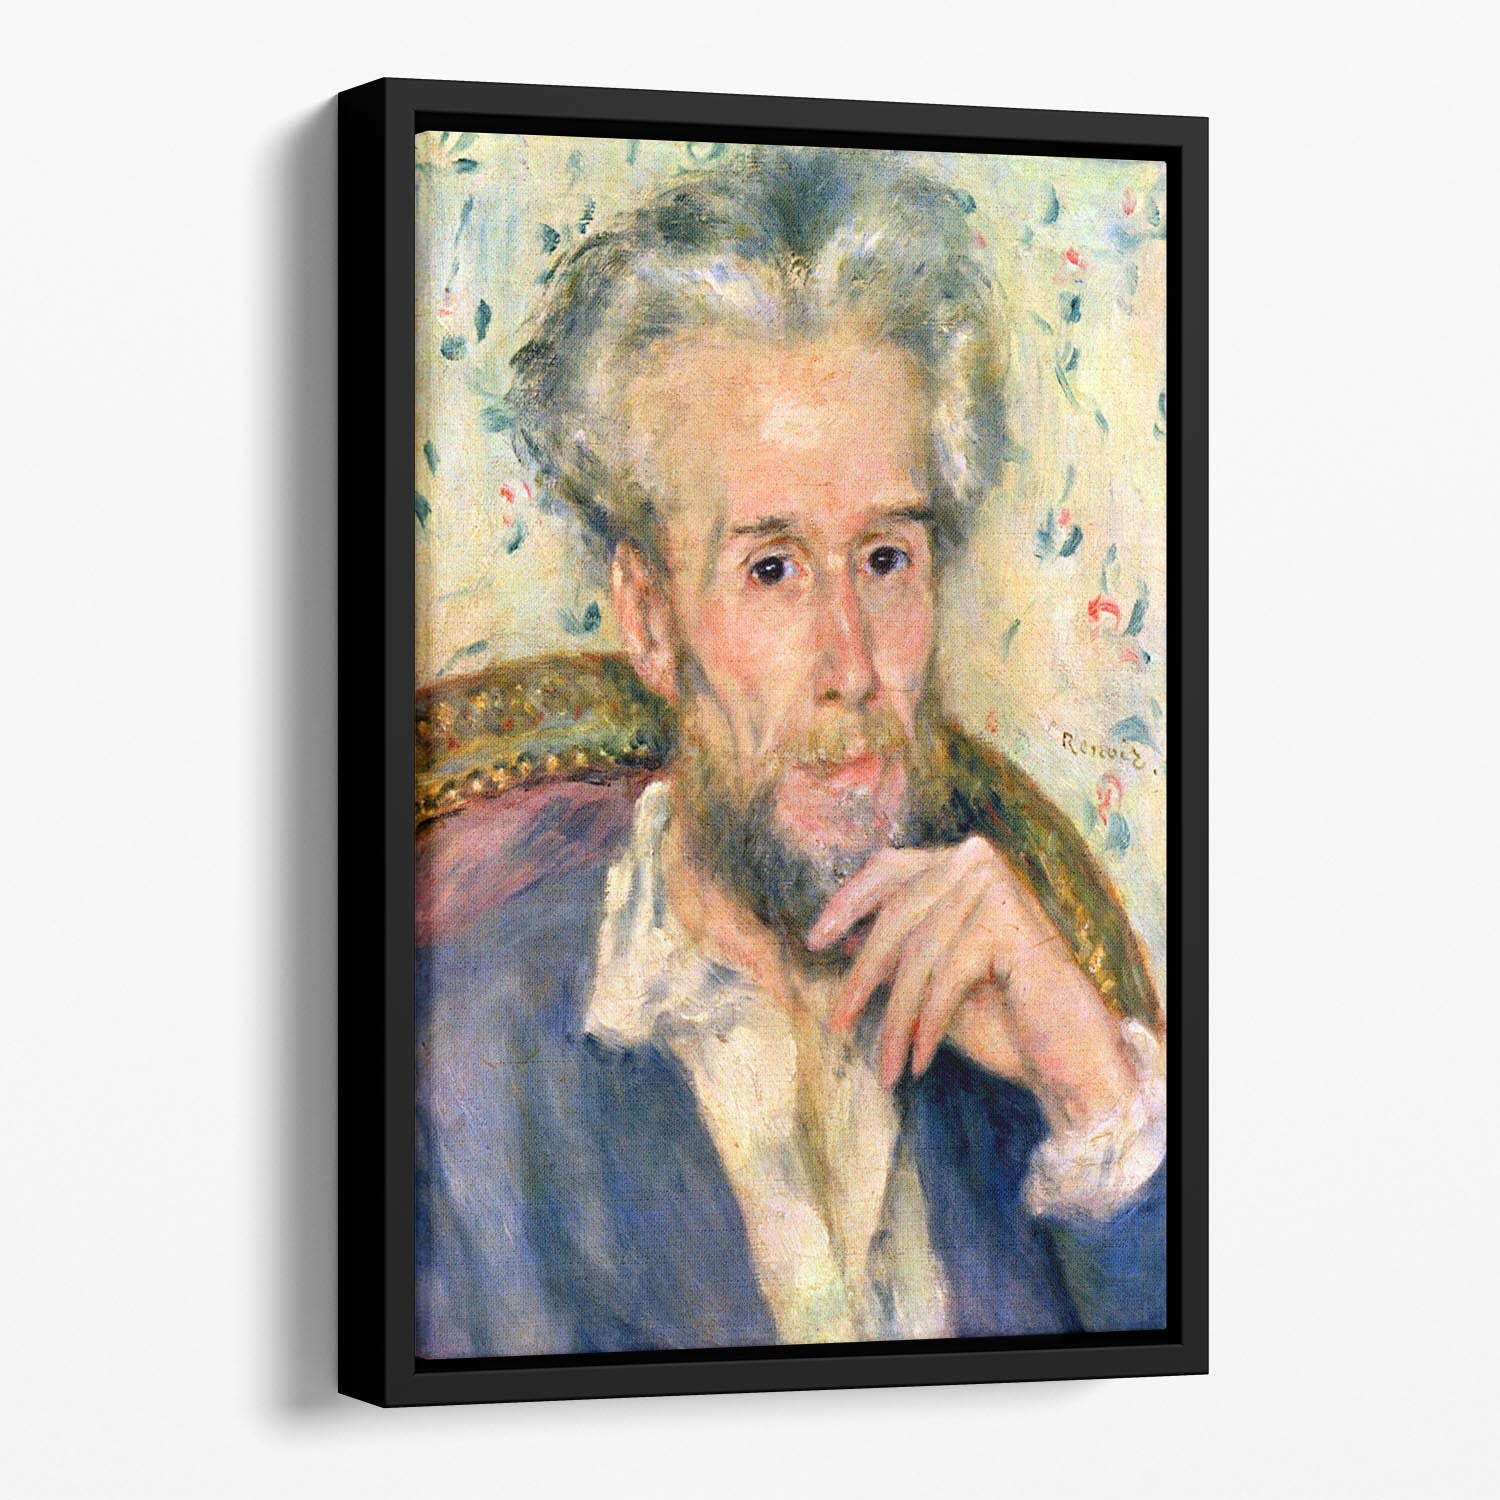 Portrait of a man by Renoir Floating Framed Canvas